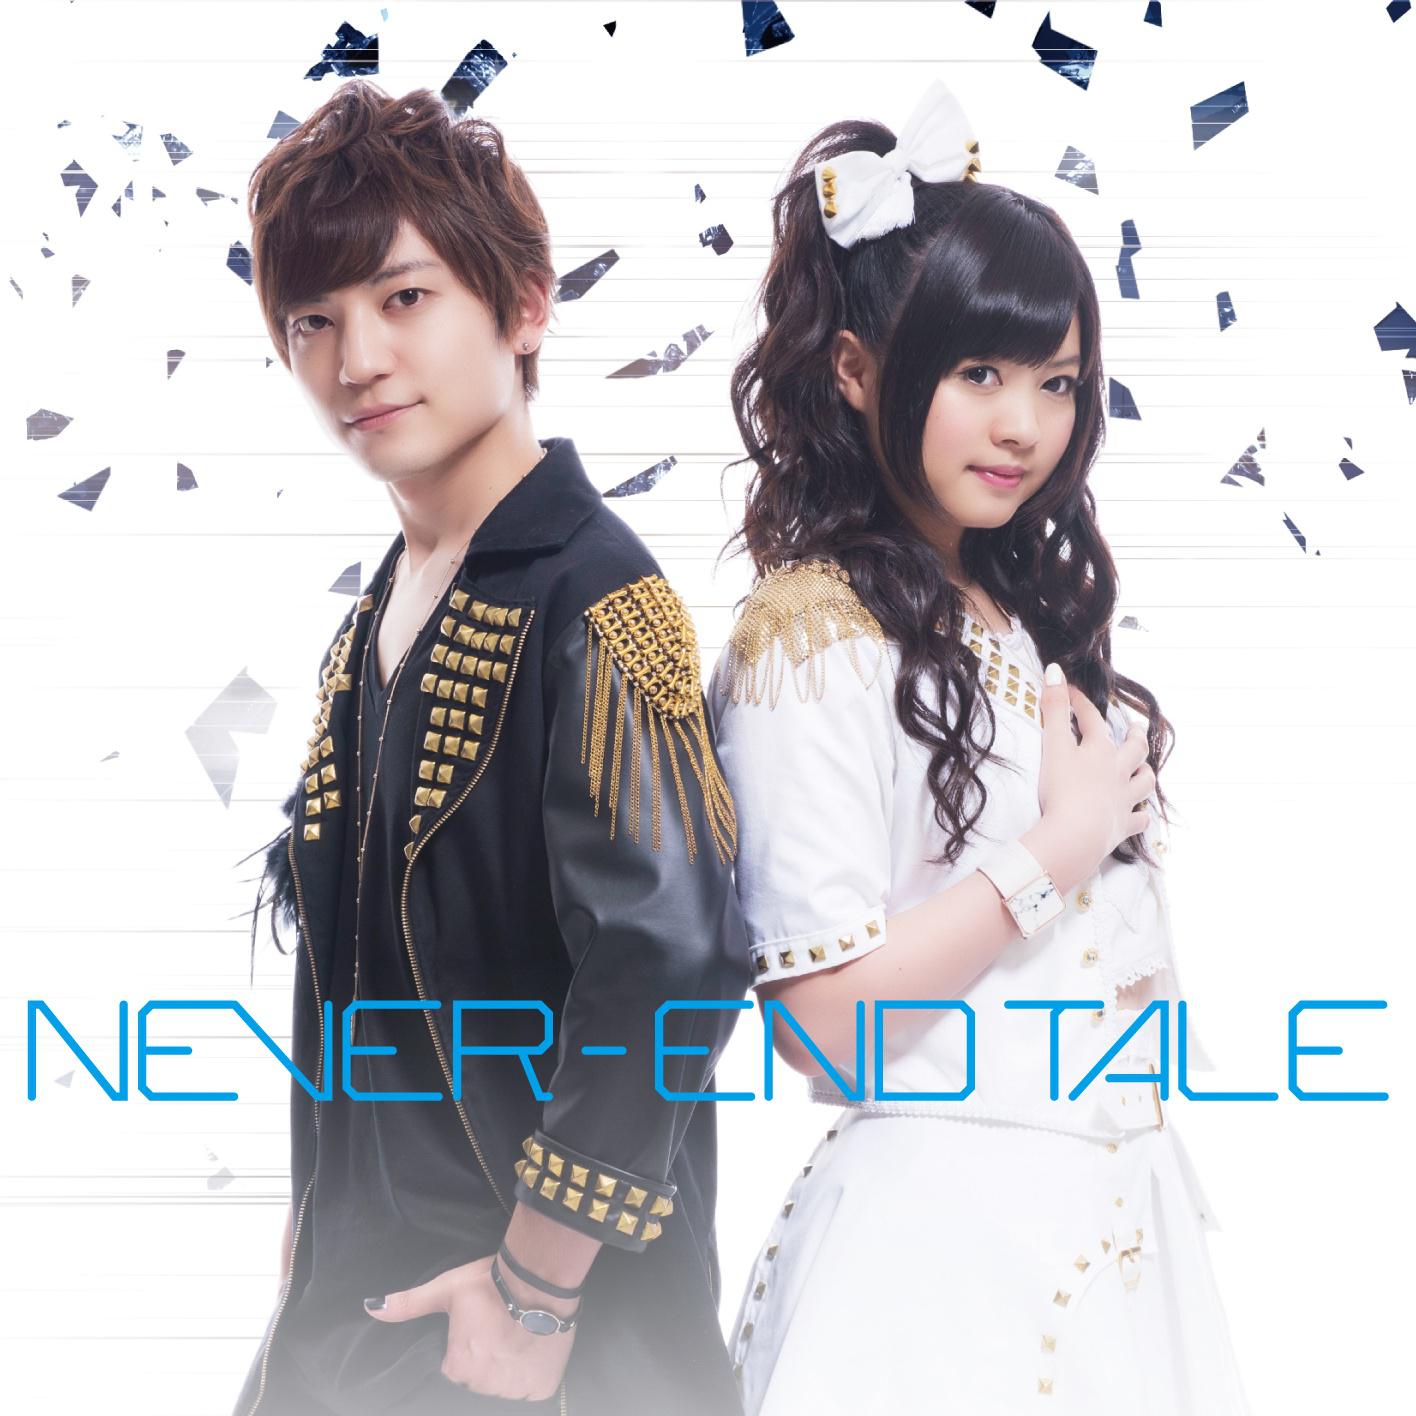 NEVER-END TALE专辑